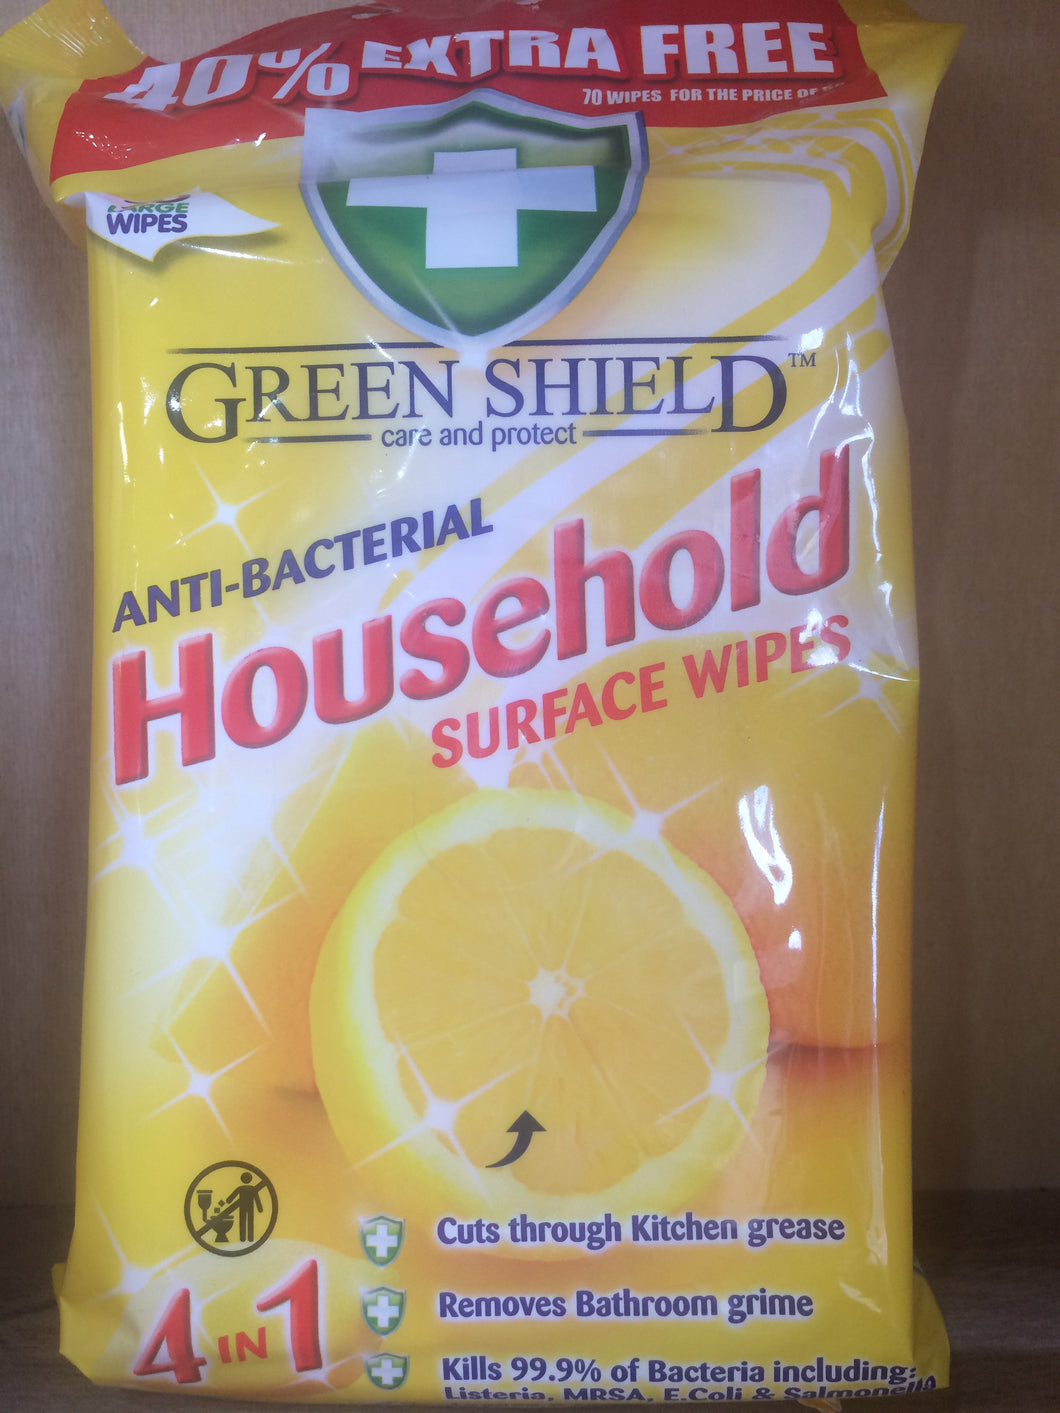 Green Shield Household Surface 70x Wipes